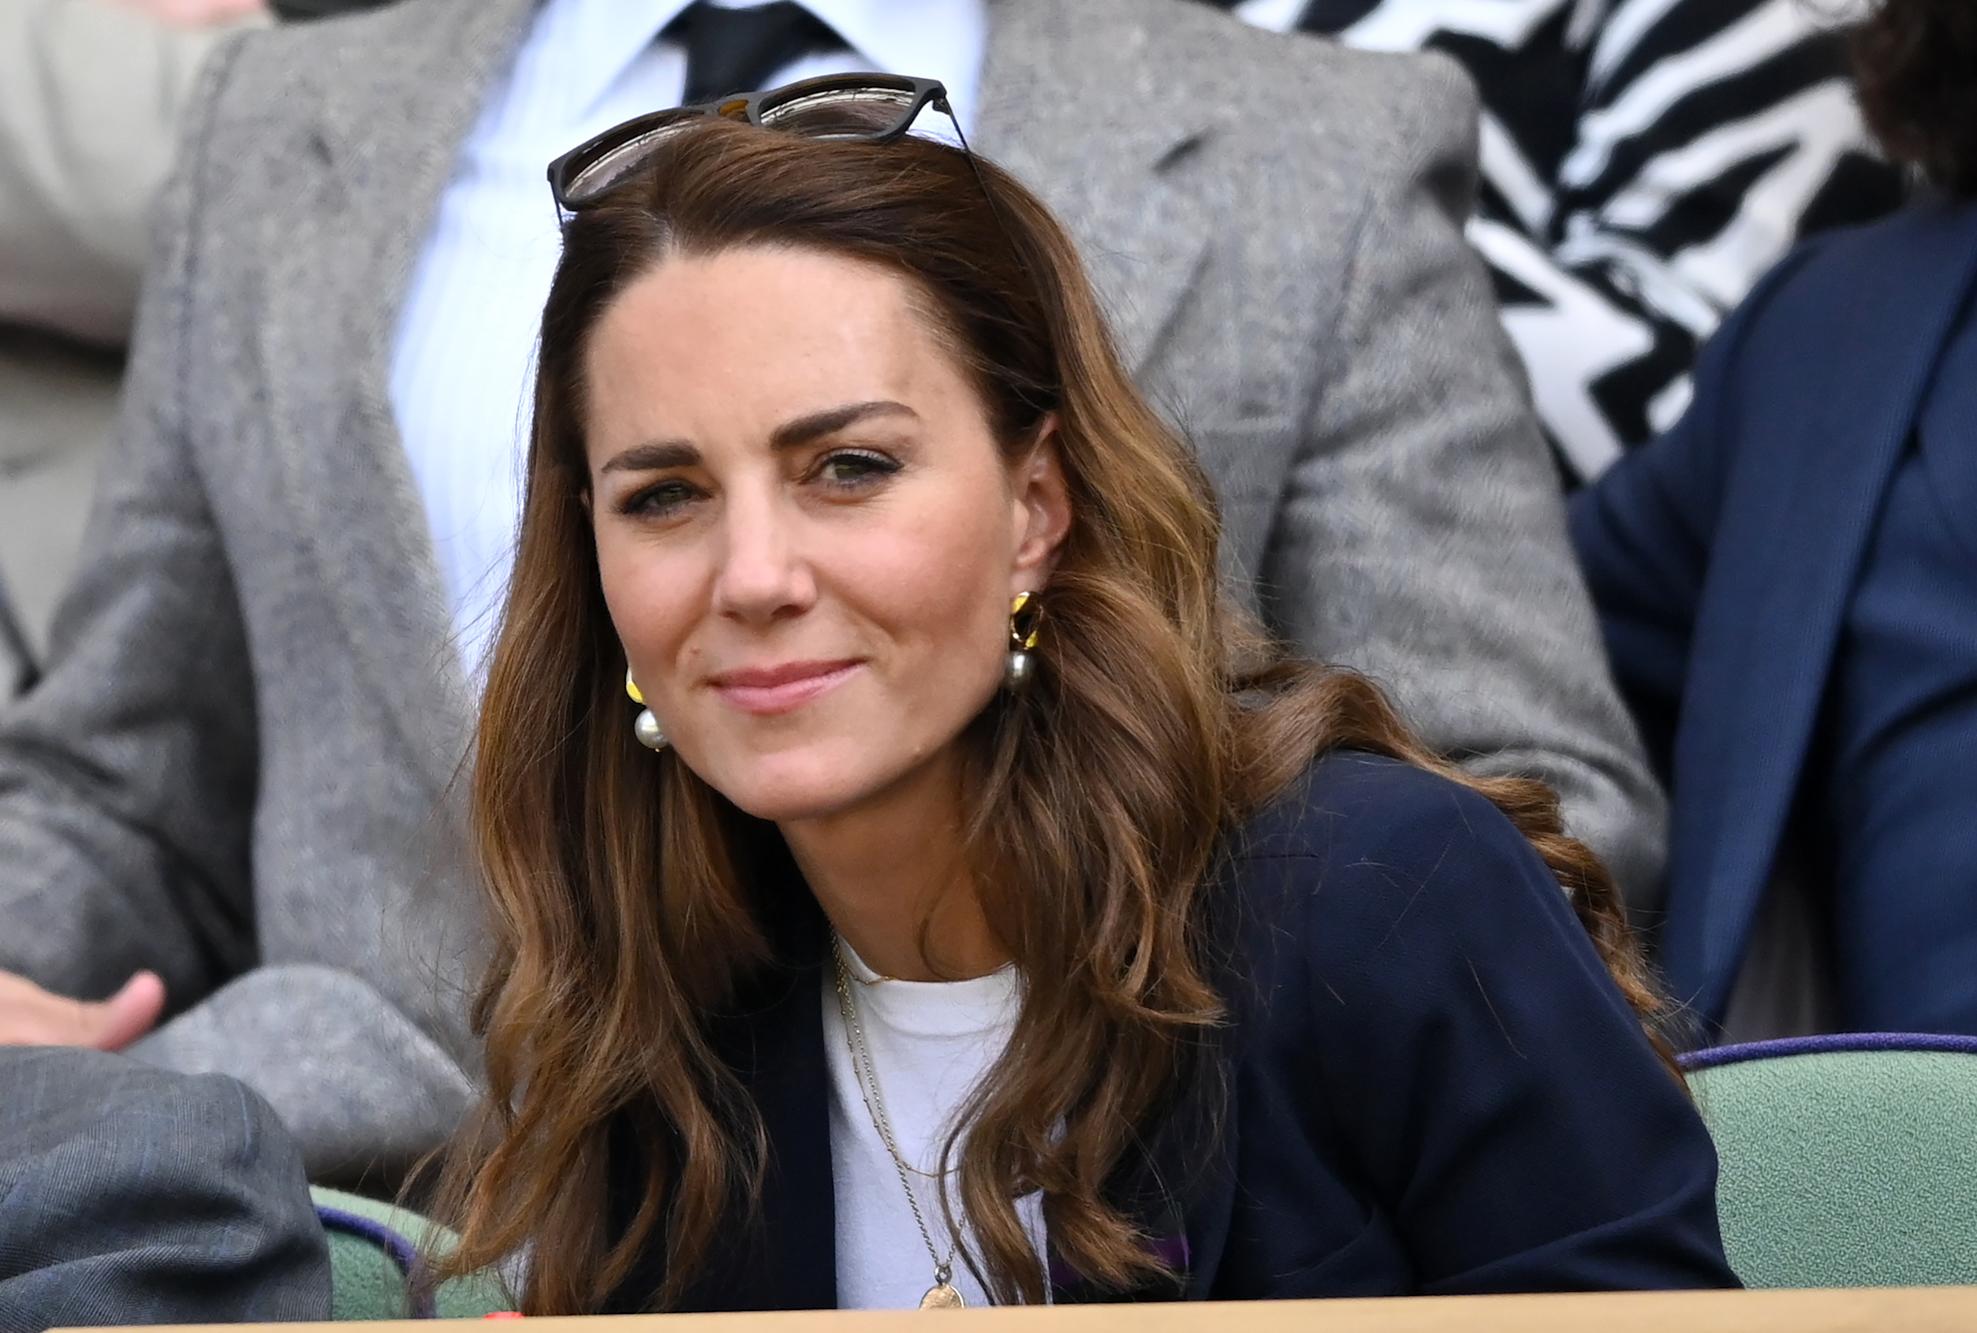 After the Covid-19 contact, Duchess of Cambridge was forced to separate